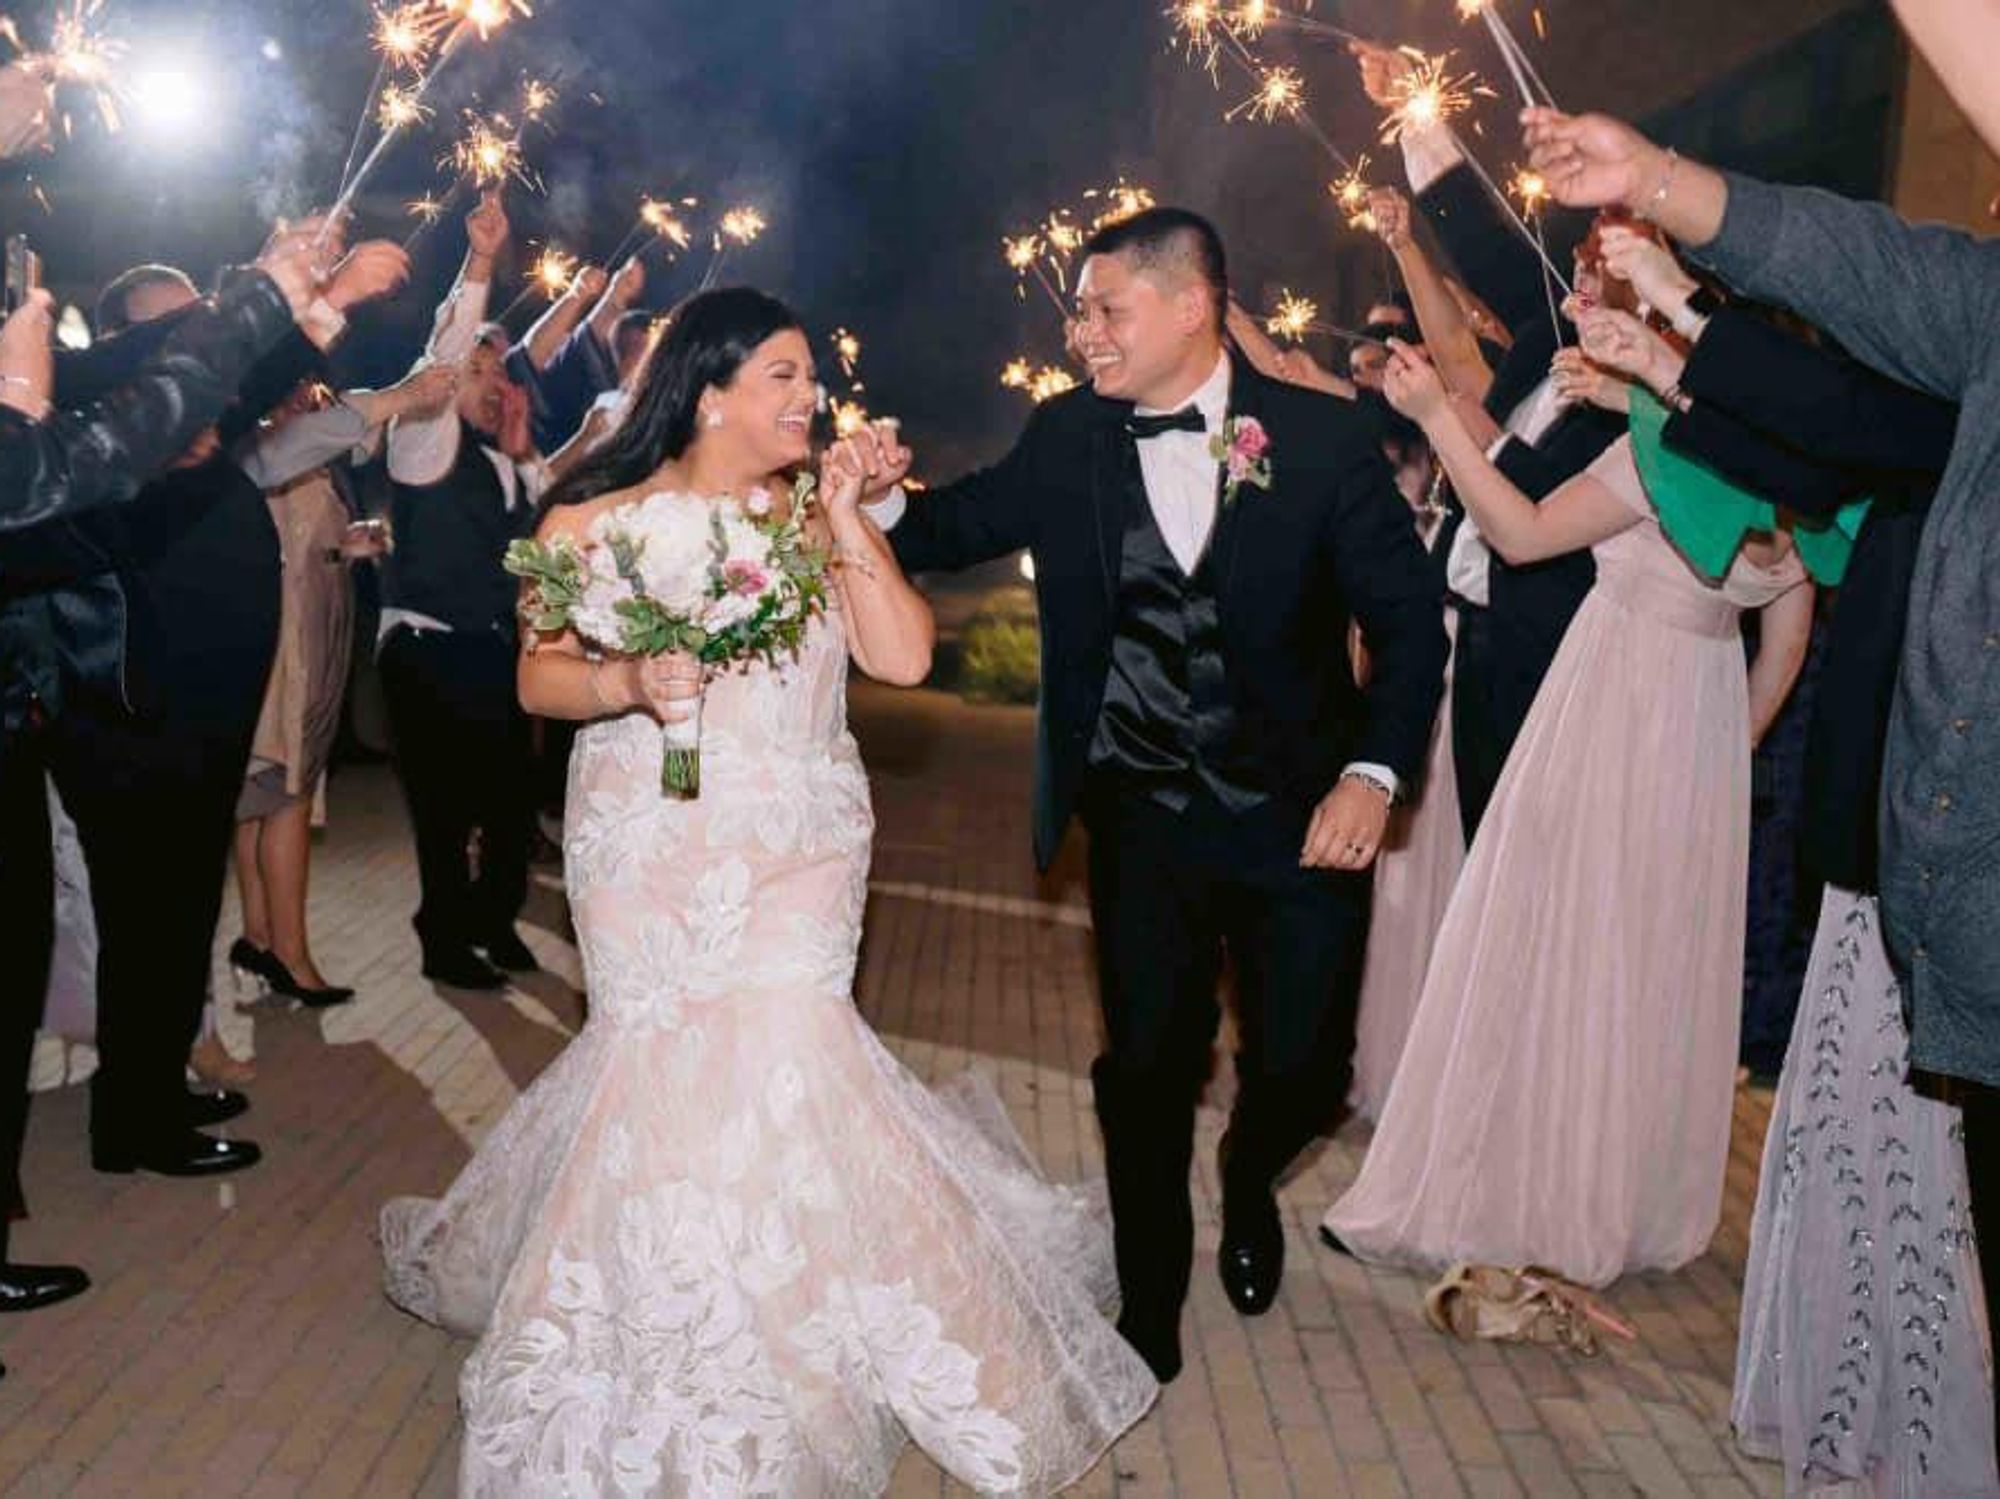 Georgette Raad and Long Hoang's sparkly wedding exit.